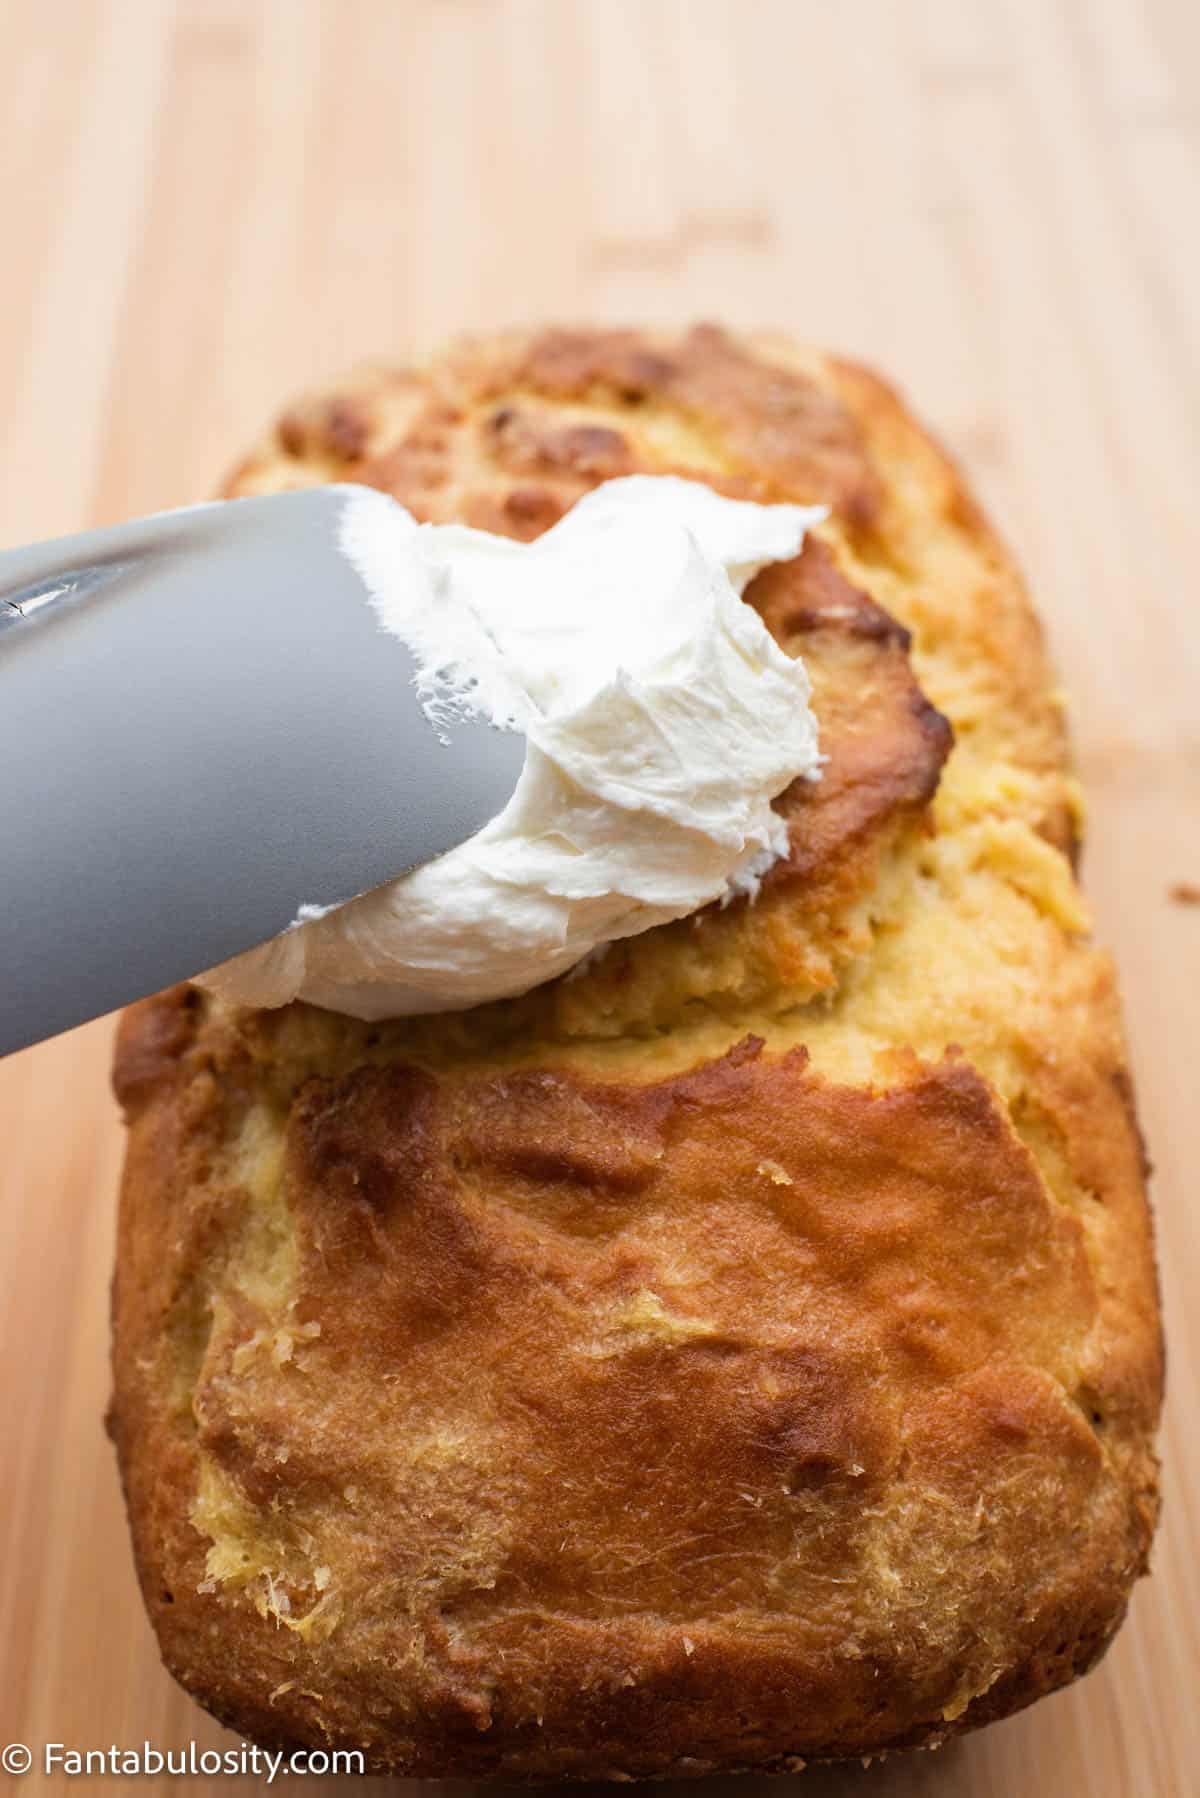 Icing being spread on a baked pineapple bread loaf.